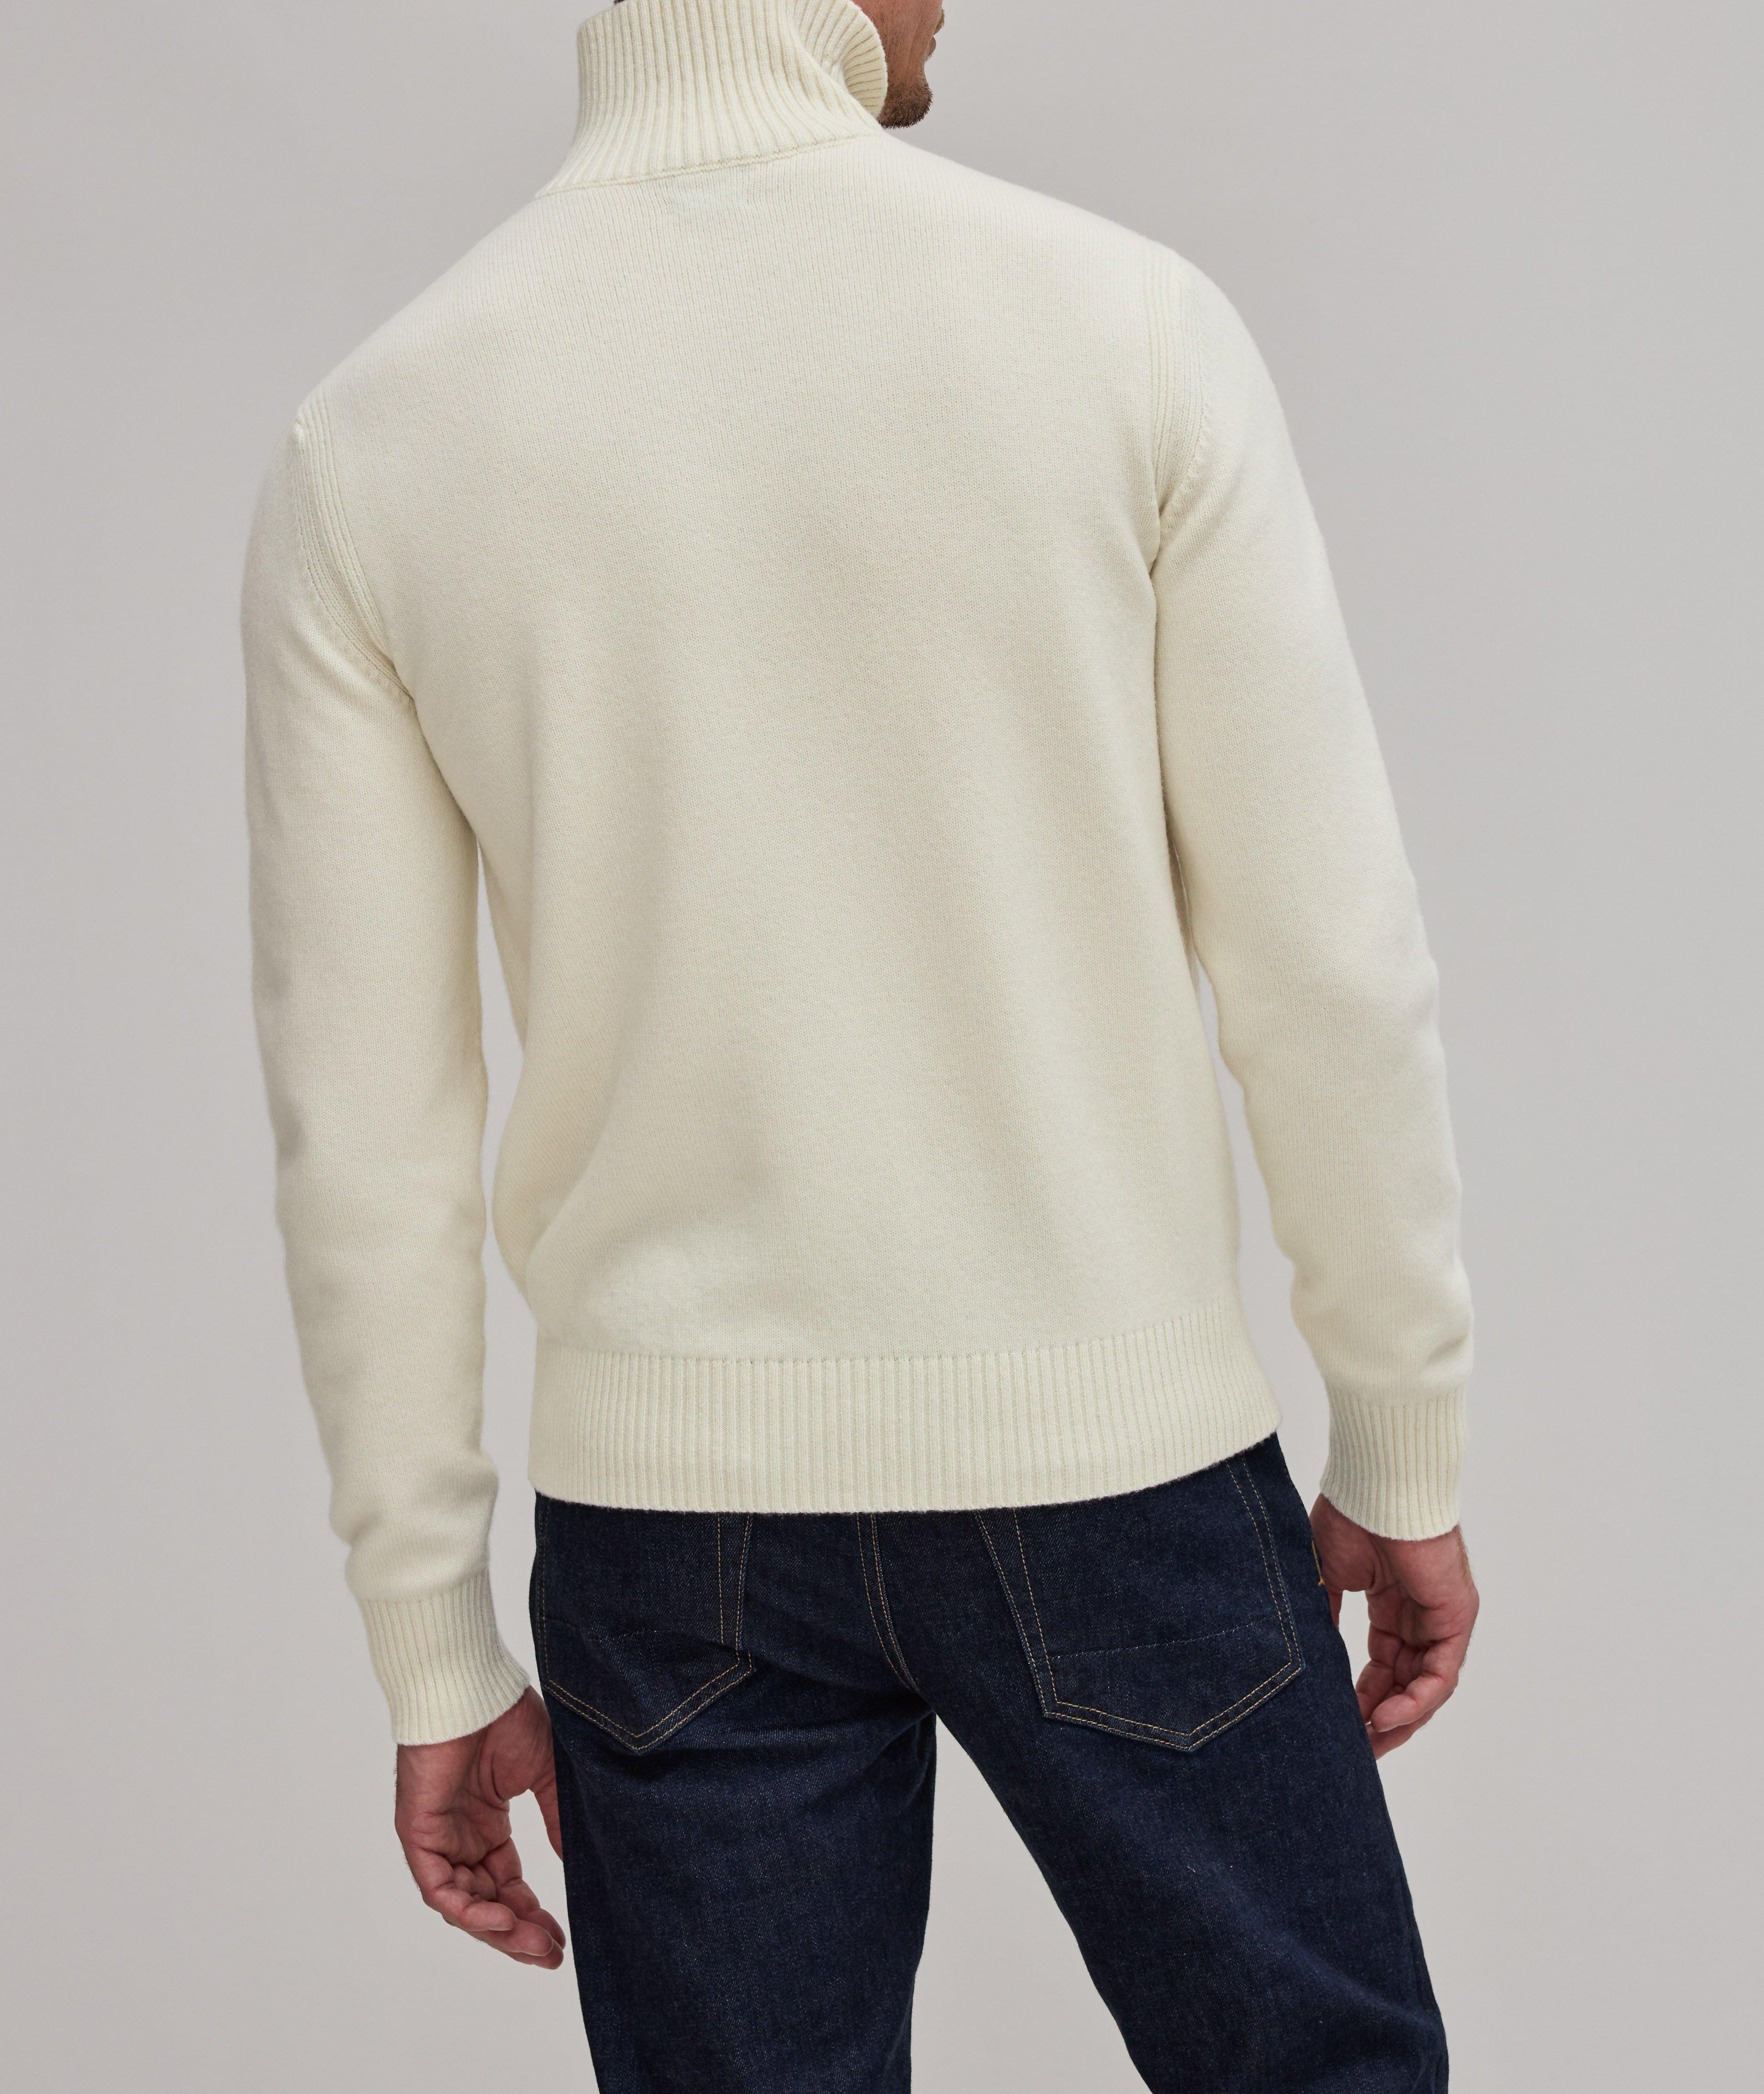 Wool-Cashmere Blend Knitted Sweater image 2